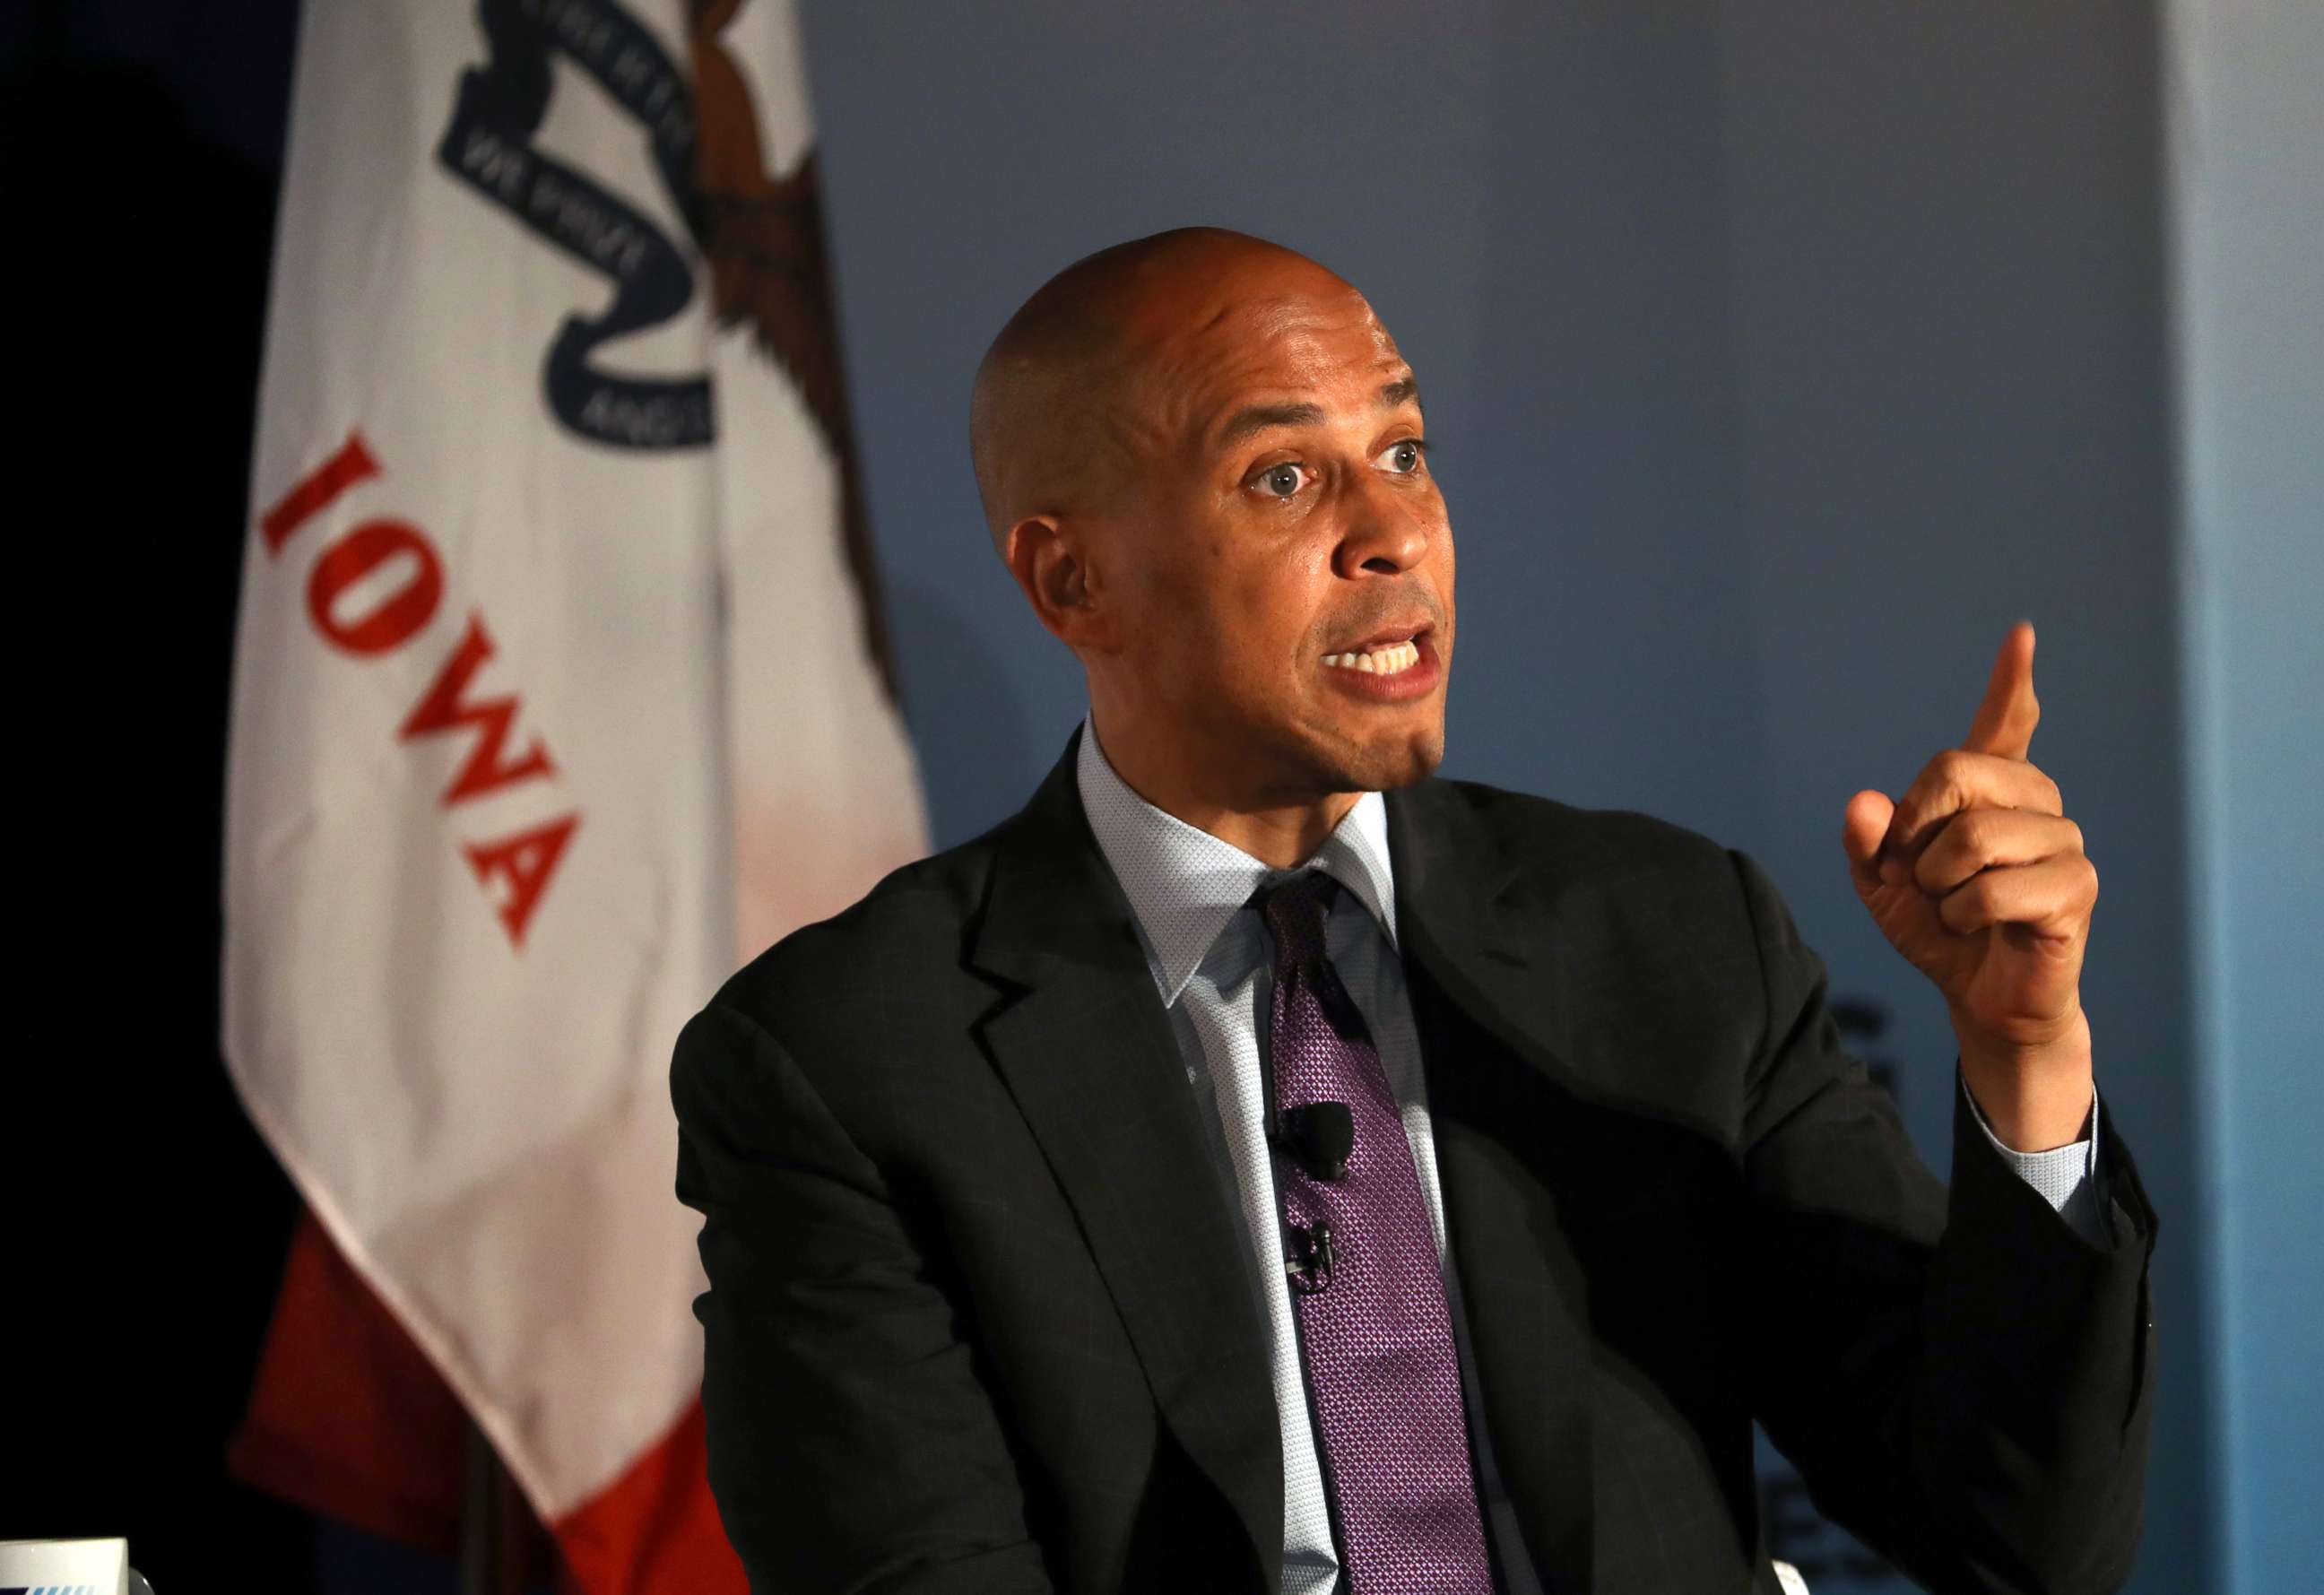 PHOTO: Sen. Cory Booker speaks during the AARP and The Des Moines Register Iowa Presidential Candidate Forum at Drake University, July 15, 2019, in Des Moines, Iowa.